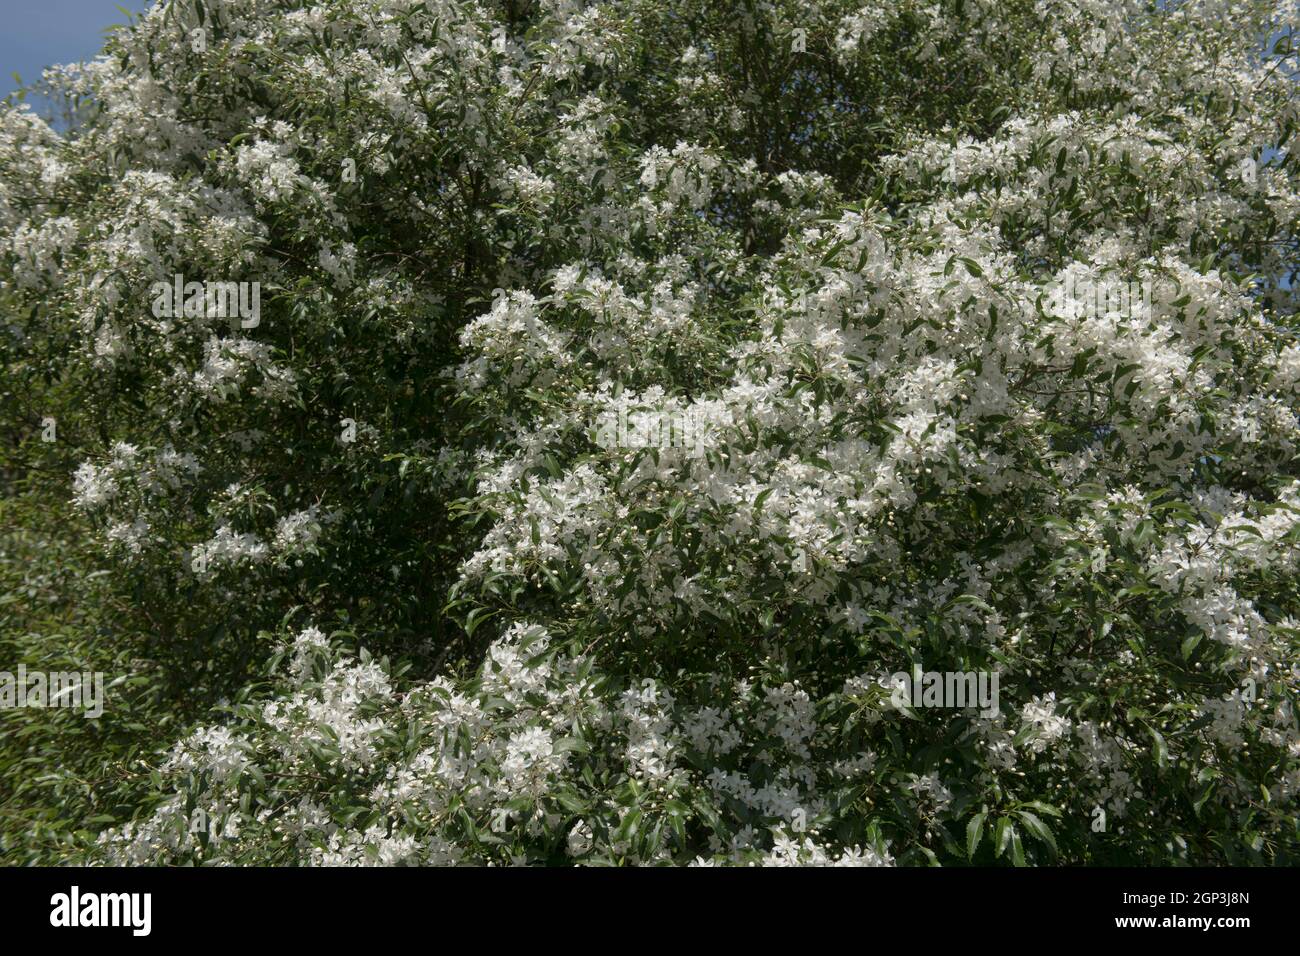 Summer Flowering White Flowers on an Evergreen Long Leaved Lacebark or Ribbonwood Tree (Hoheria sexstylosa) with a Bright Blue Sky Background Stock Photo